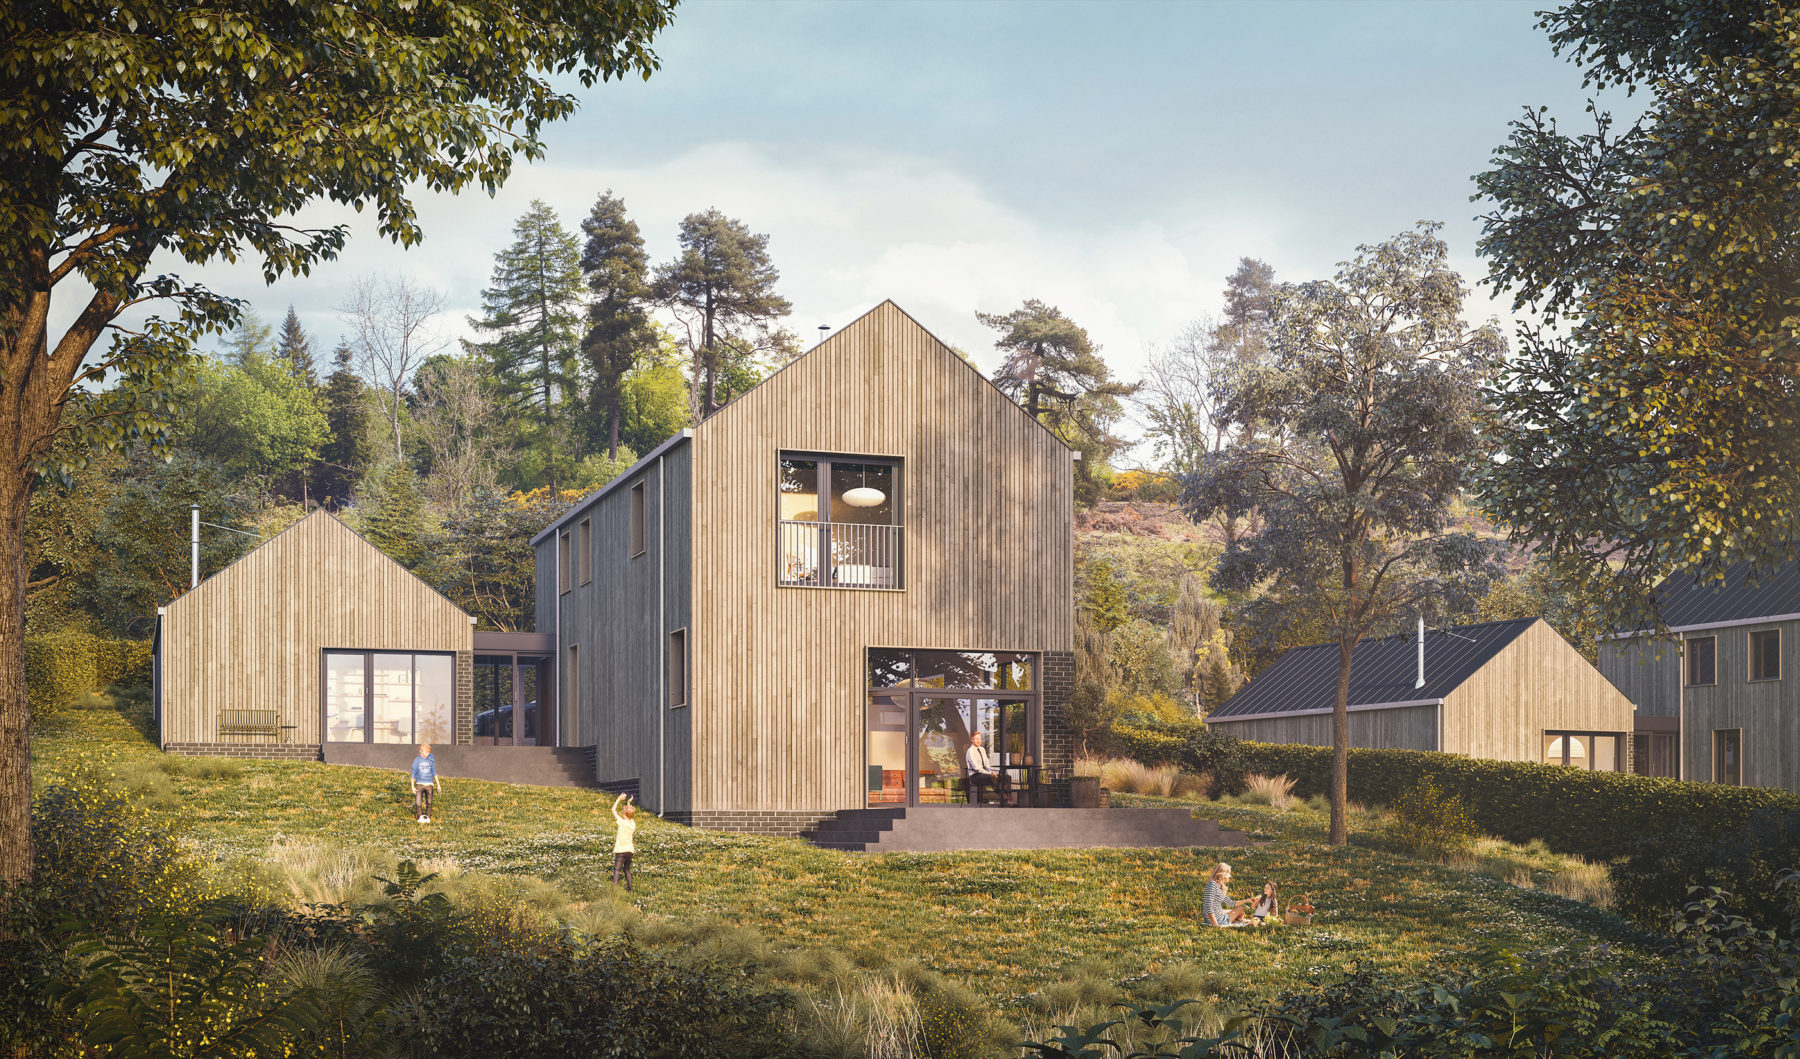 Athron Hill Exterior - timber clad residential development set in countryside and wooded landscape. Perth & Kinross